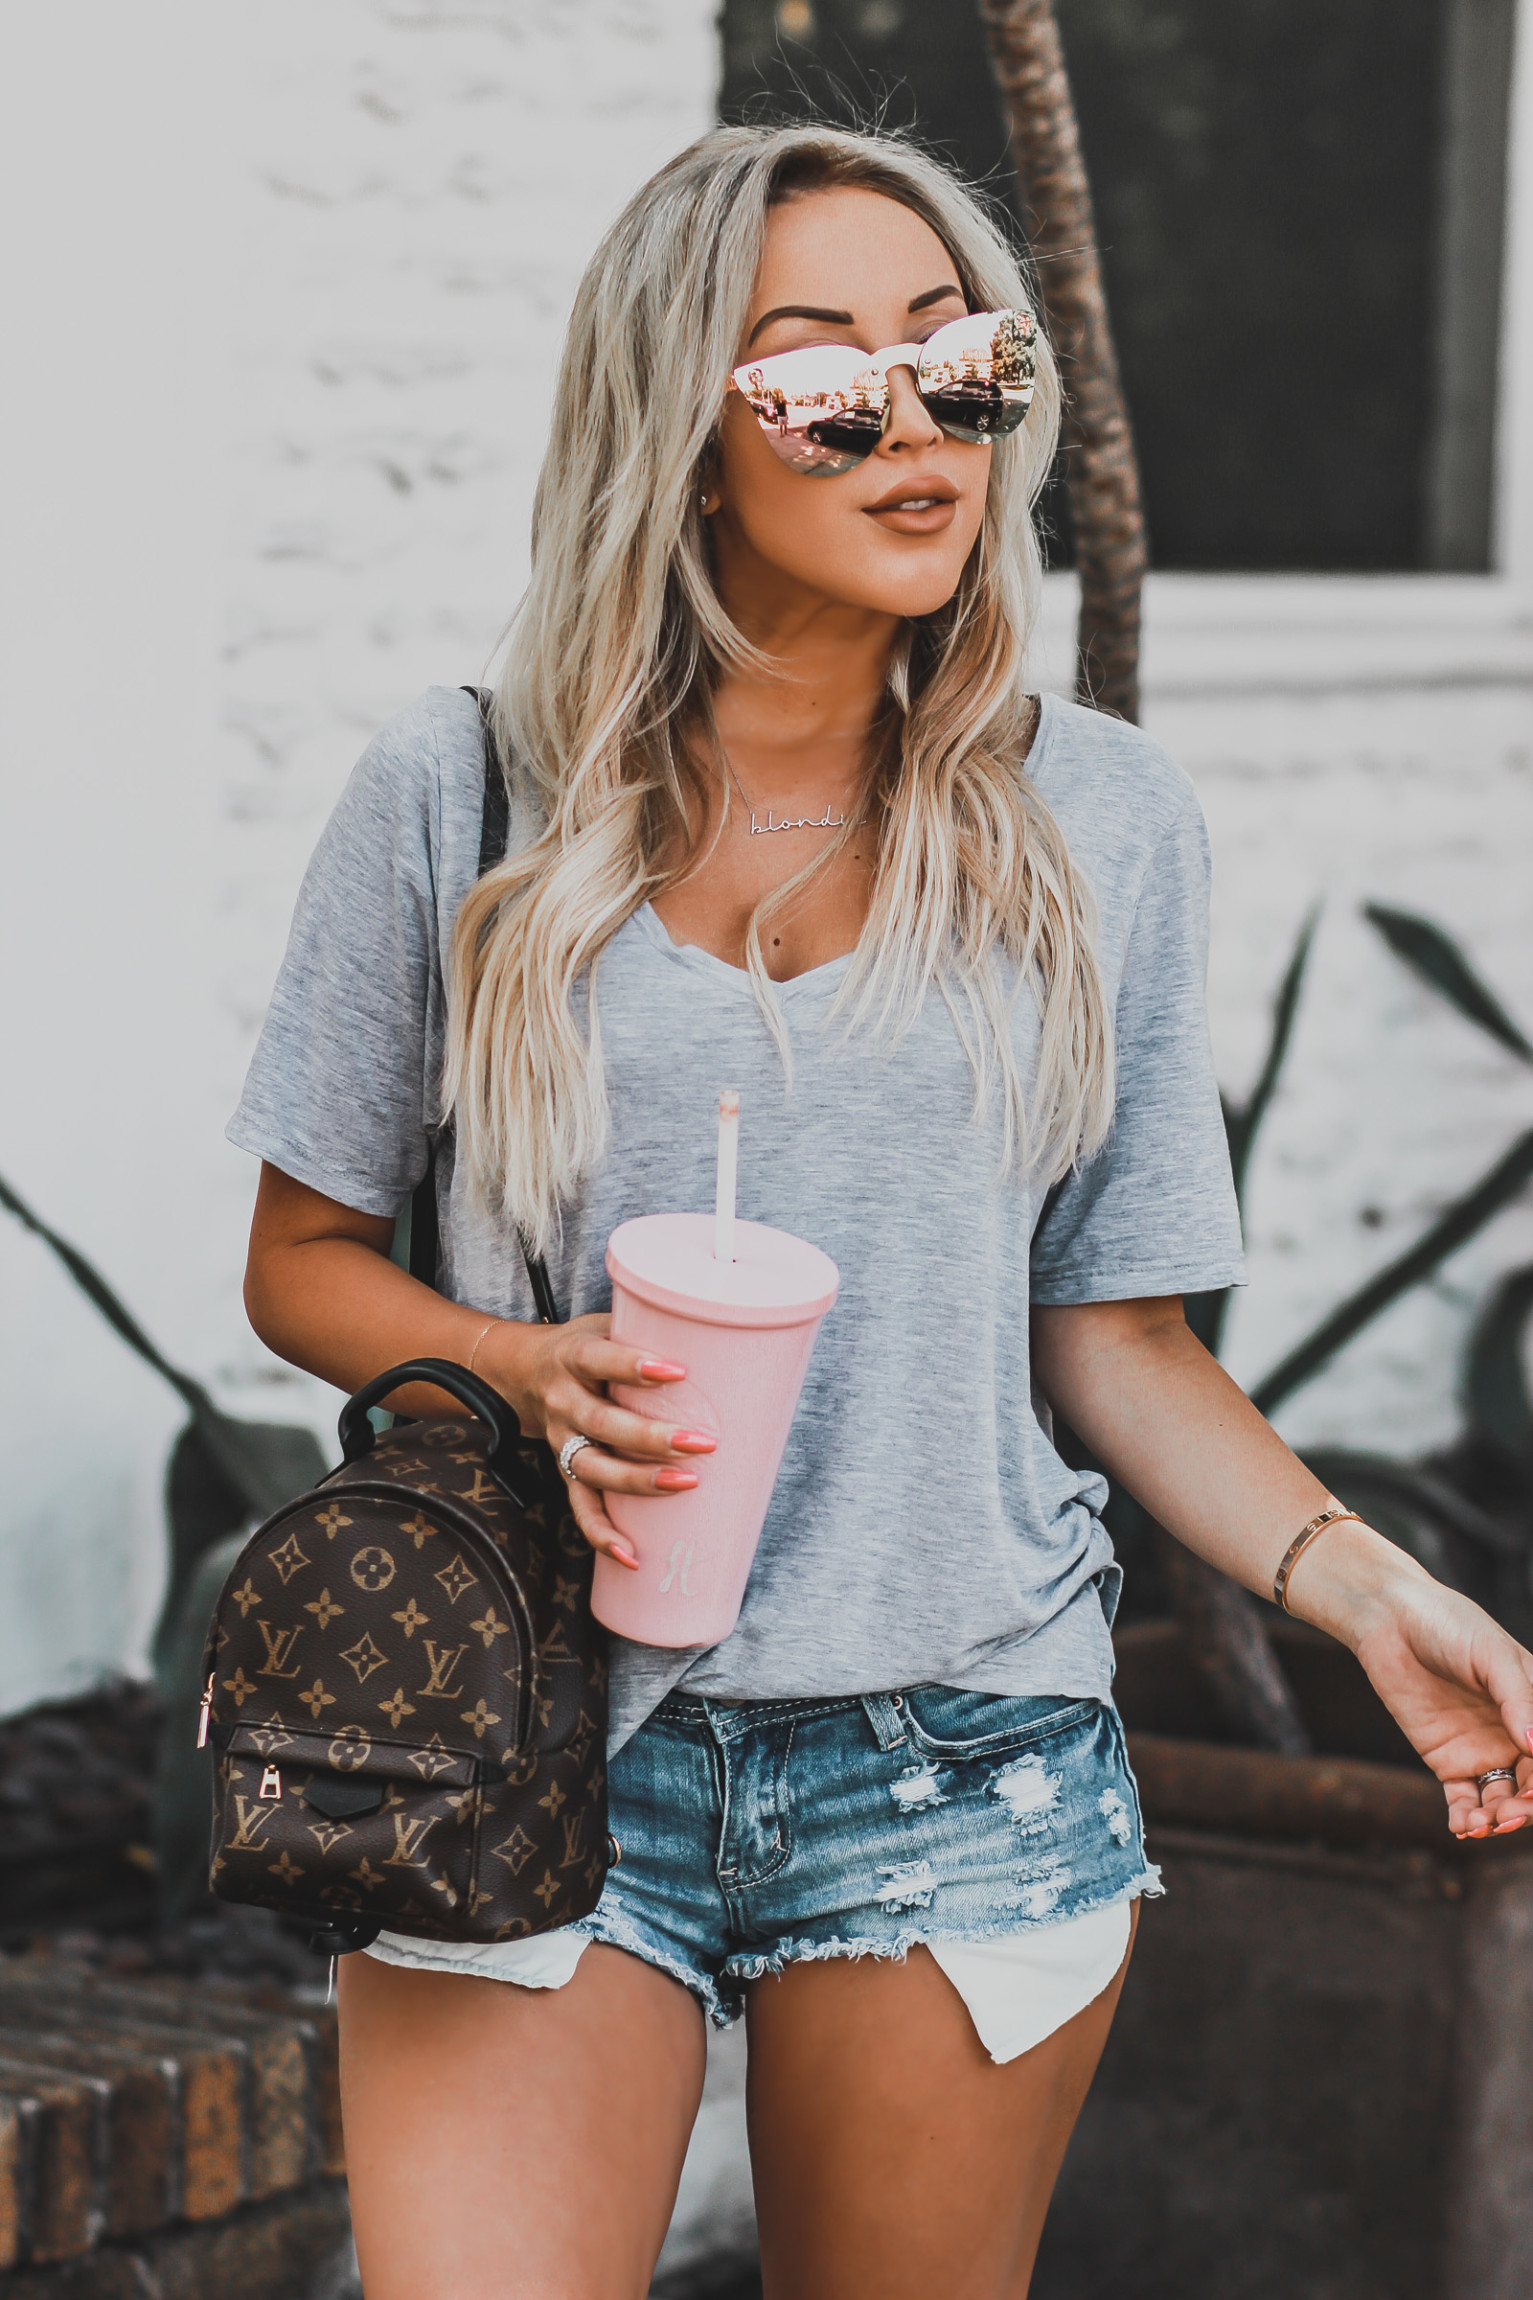 Rose Gold APL's | Rose Gold Sunglasses | Blondie in the City by Hayley Larue